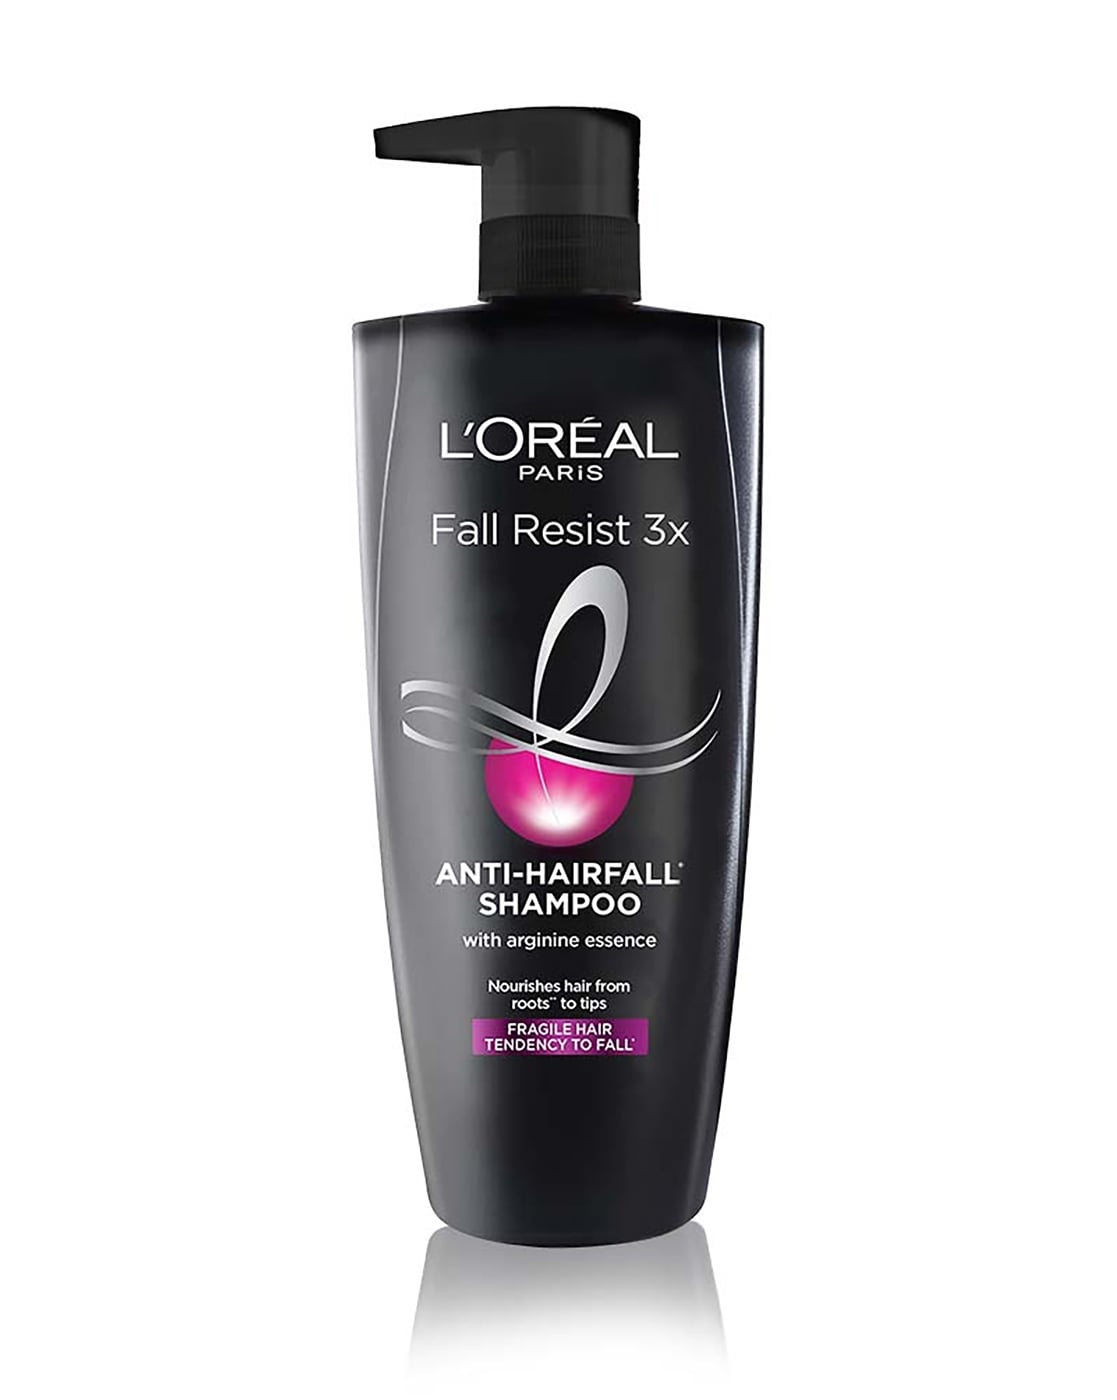 Loreal Paris Fall resist 3x Antihair fall shampoo And conditioner Honest  review does it work  YouTube